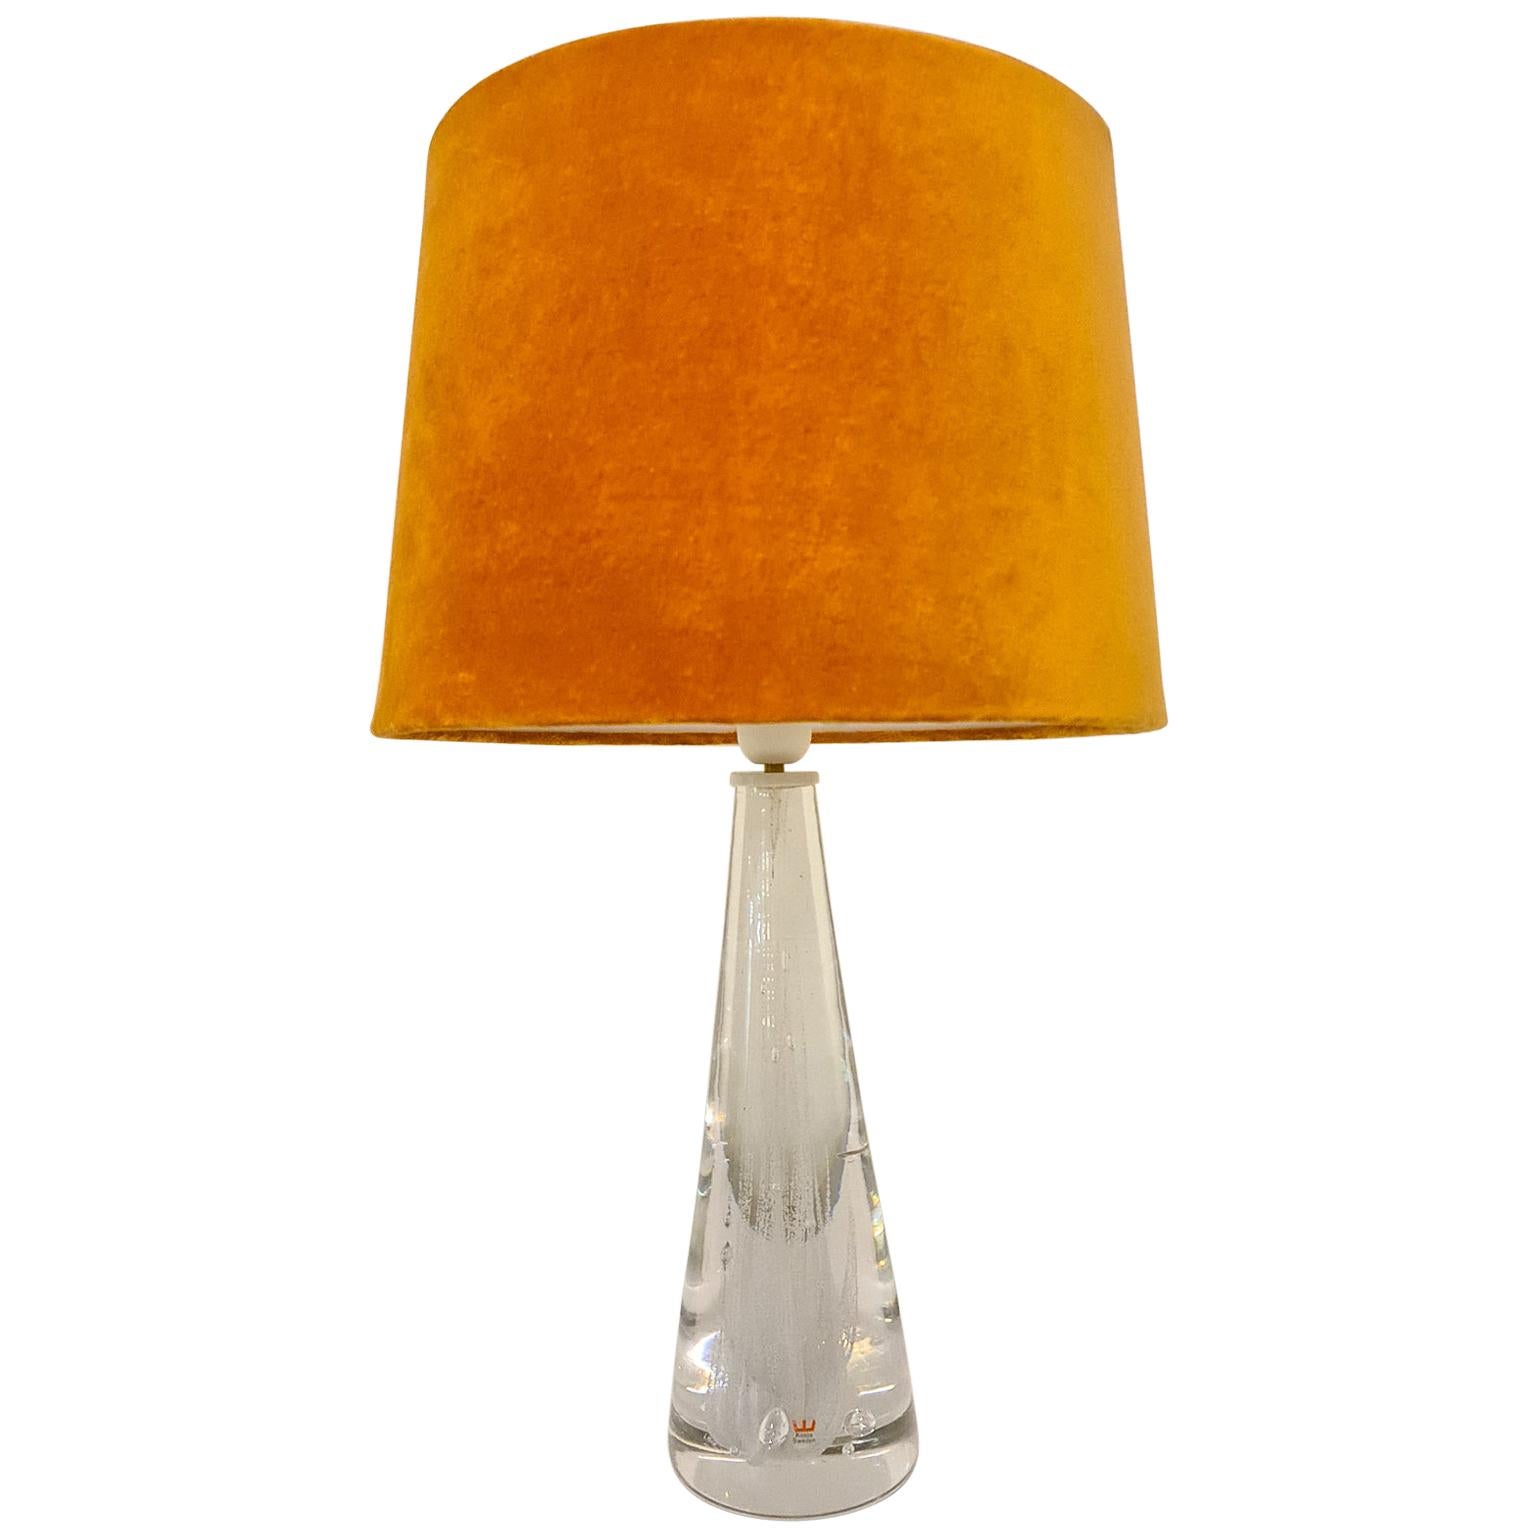 Midcentury Crystal Glass Table Lamp by Vicke Lindstrand Kosta, Sweden